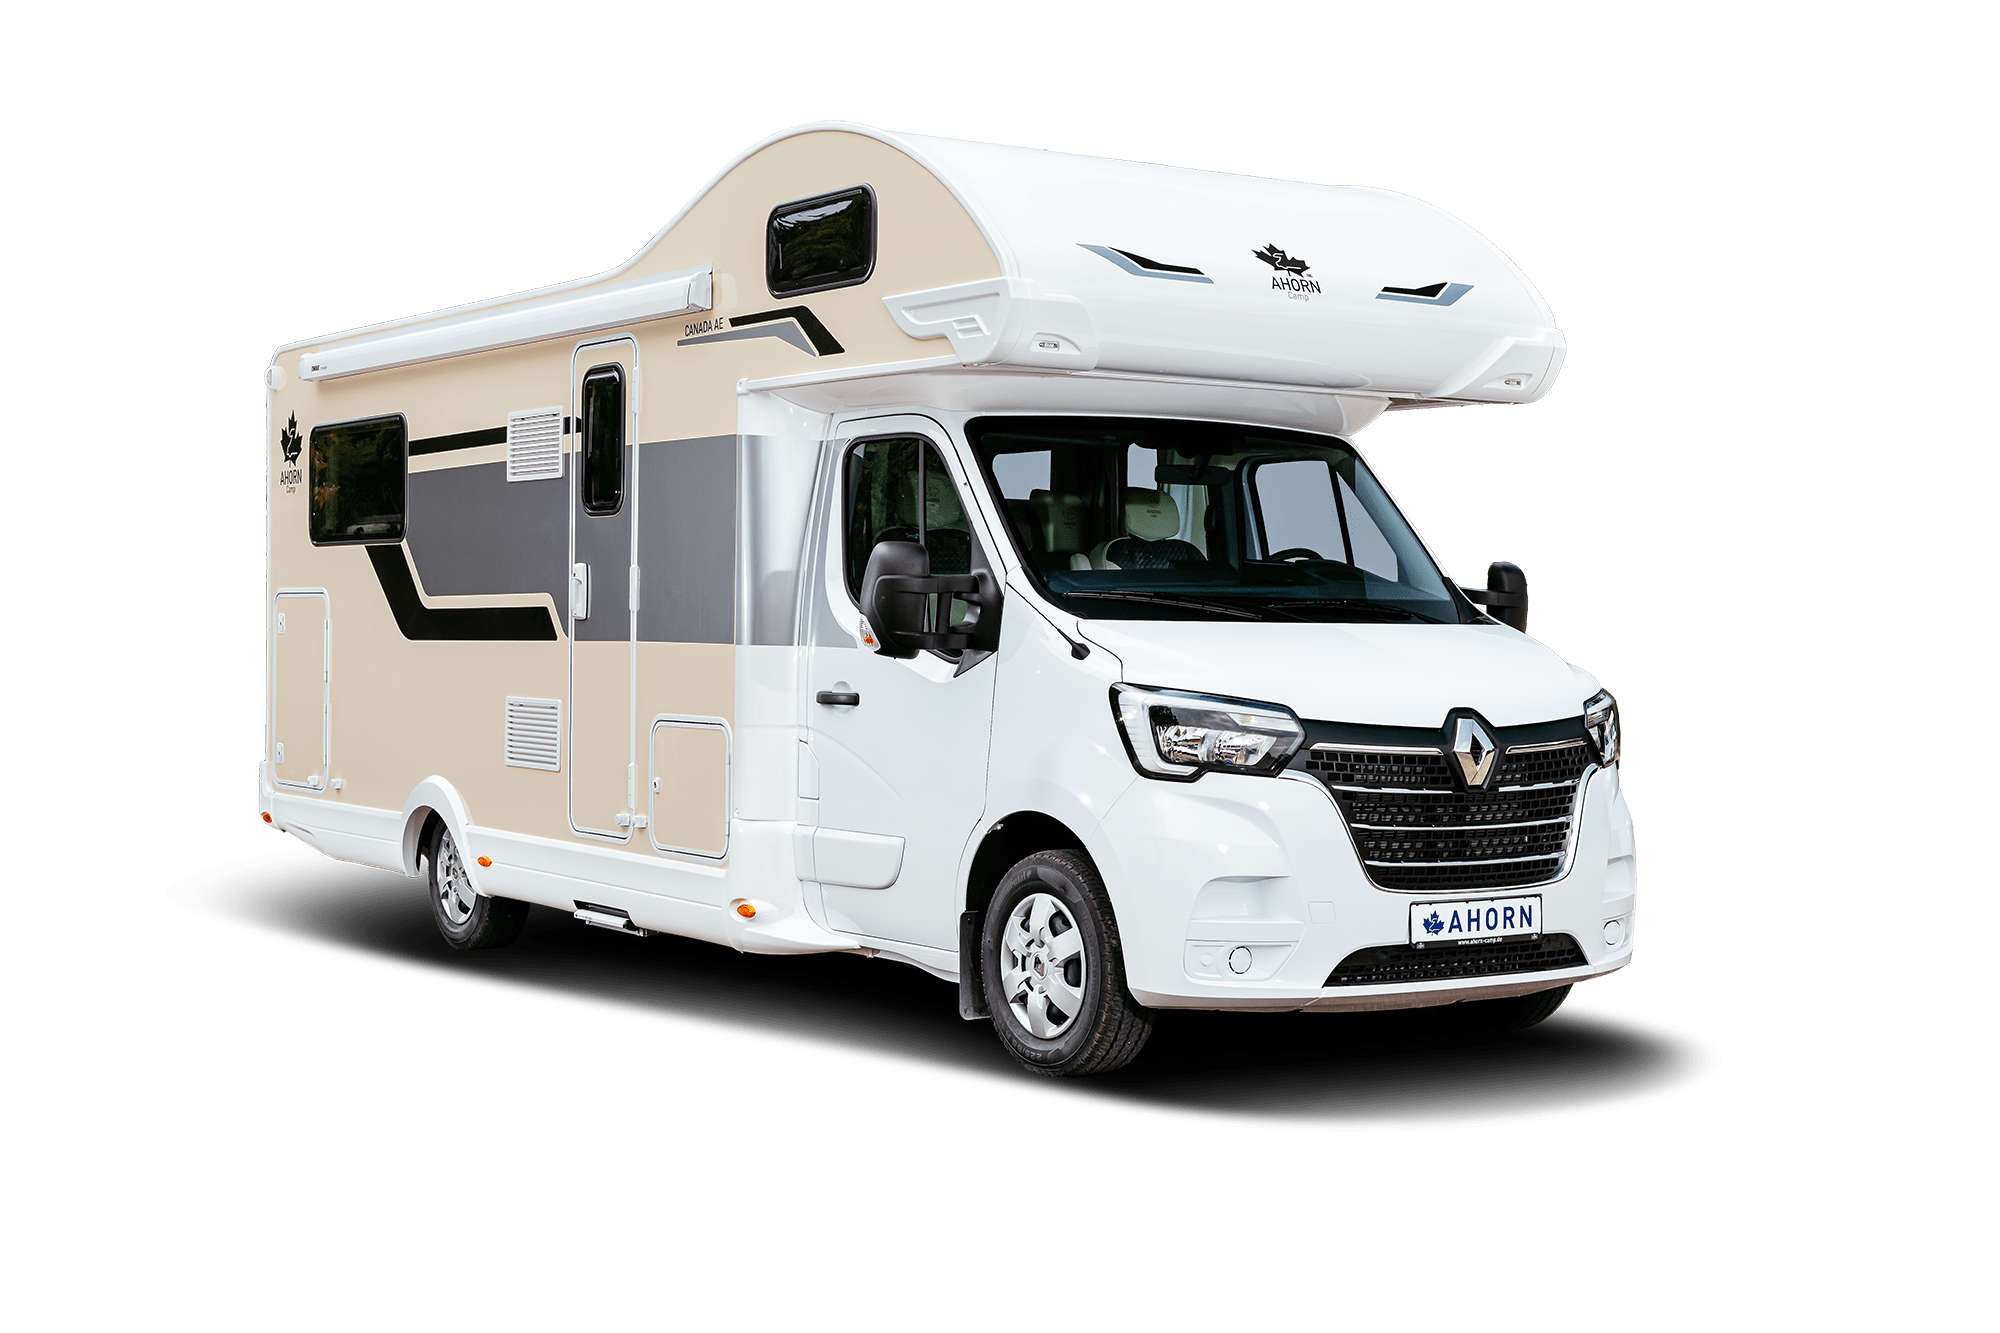 The Canada AE Alcove motorhome from the front.